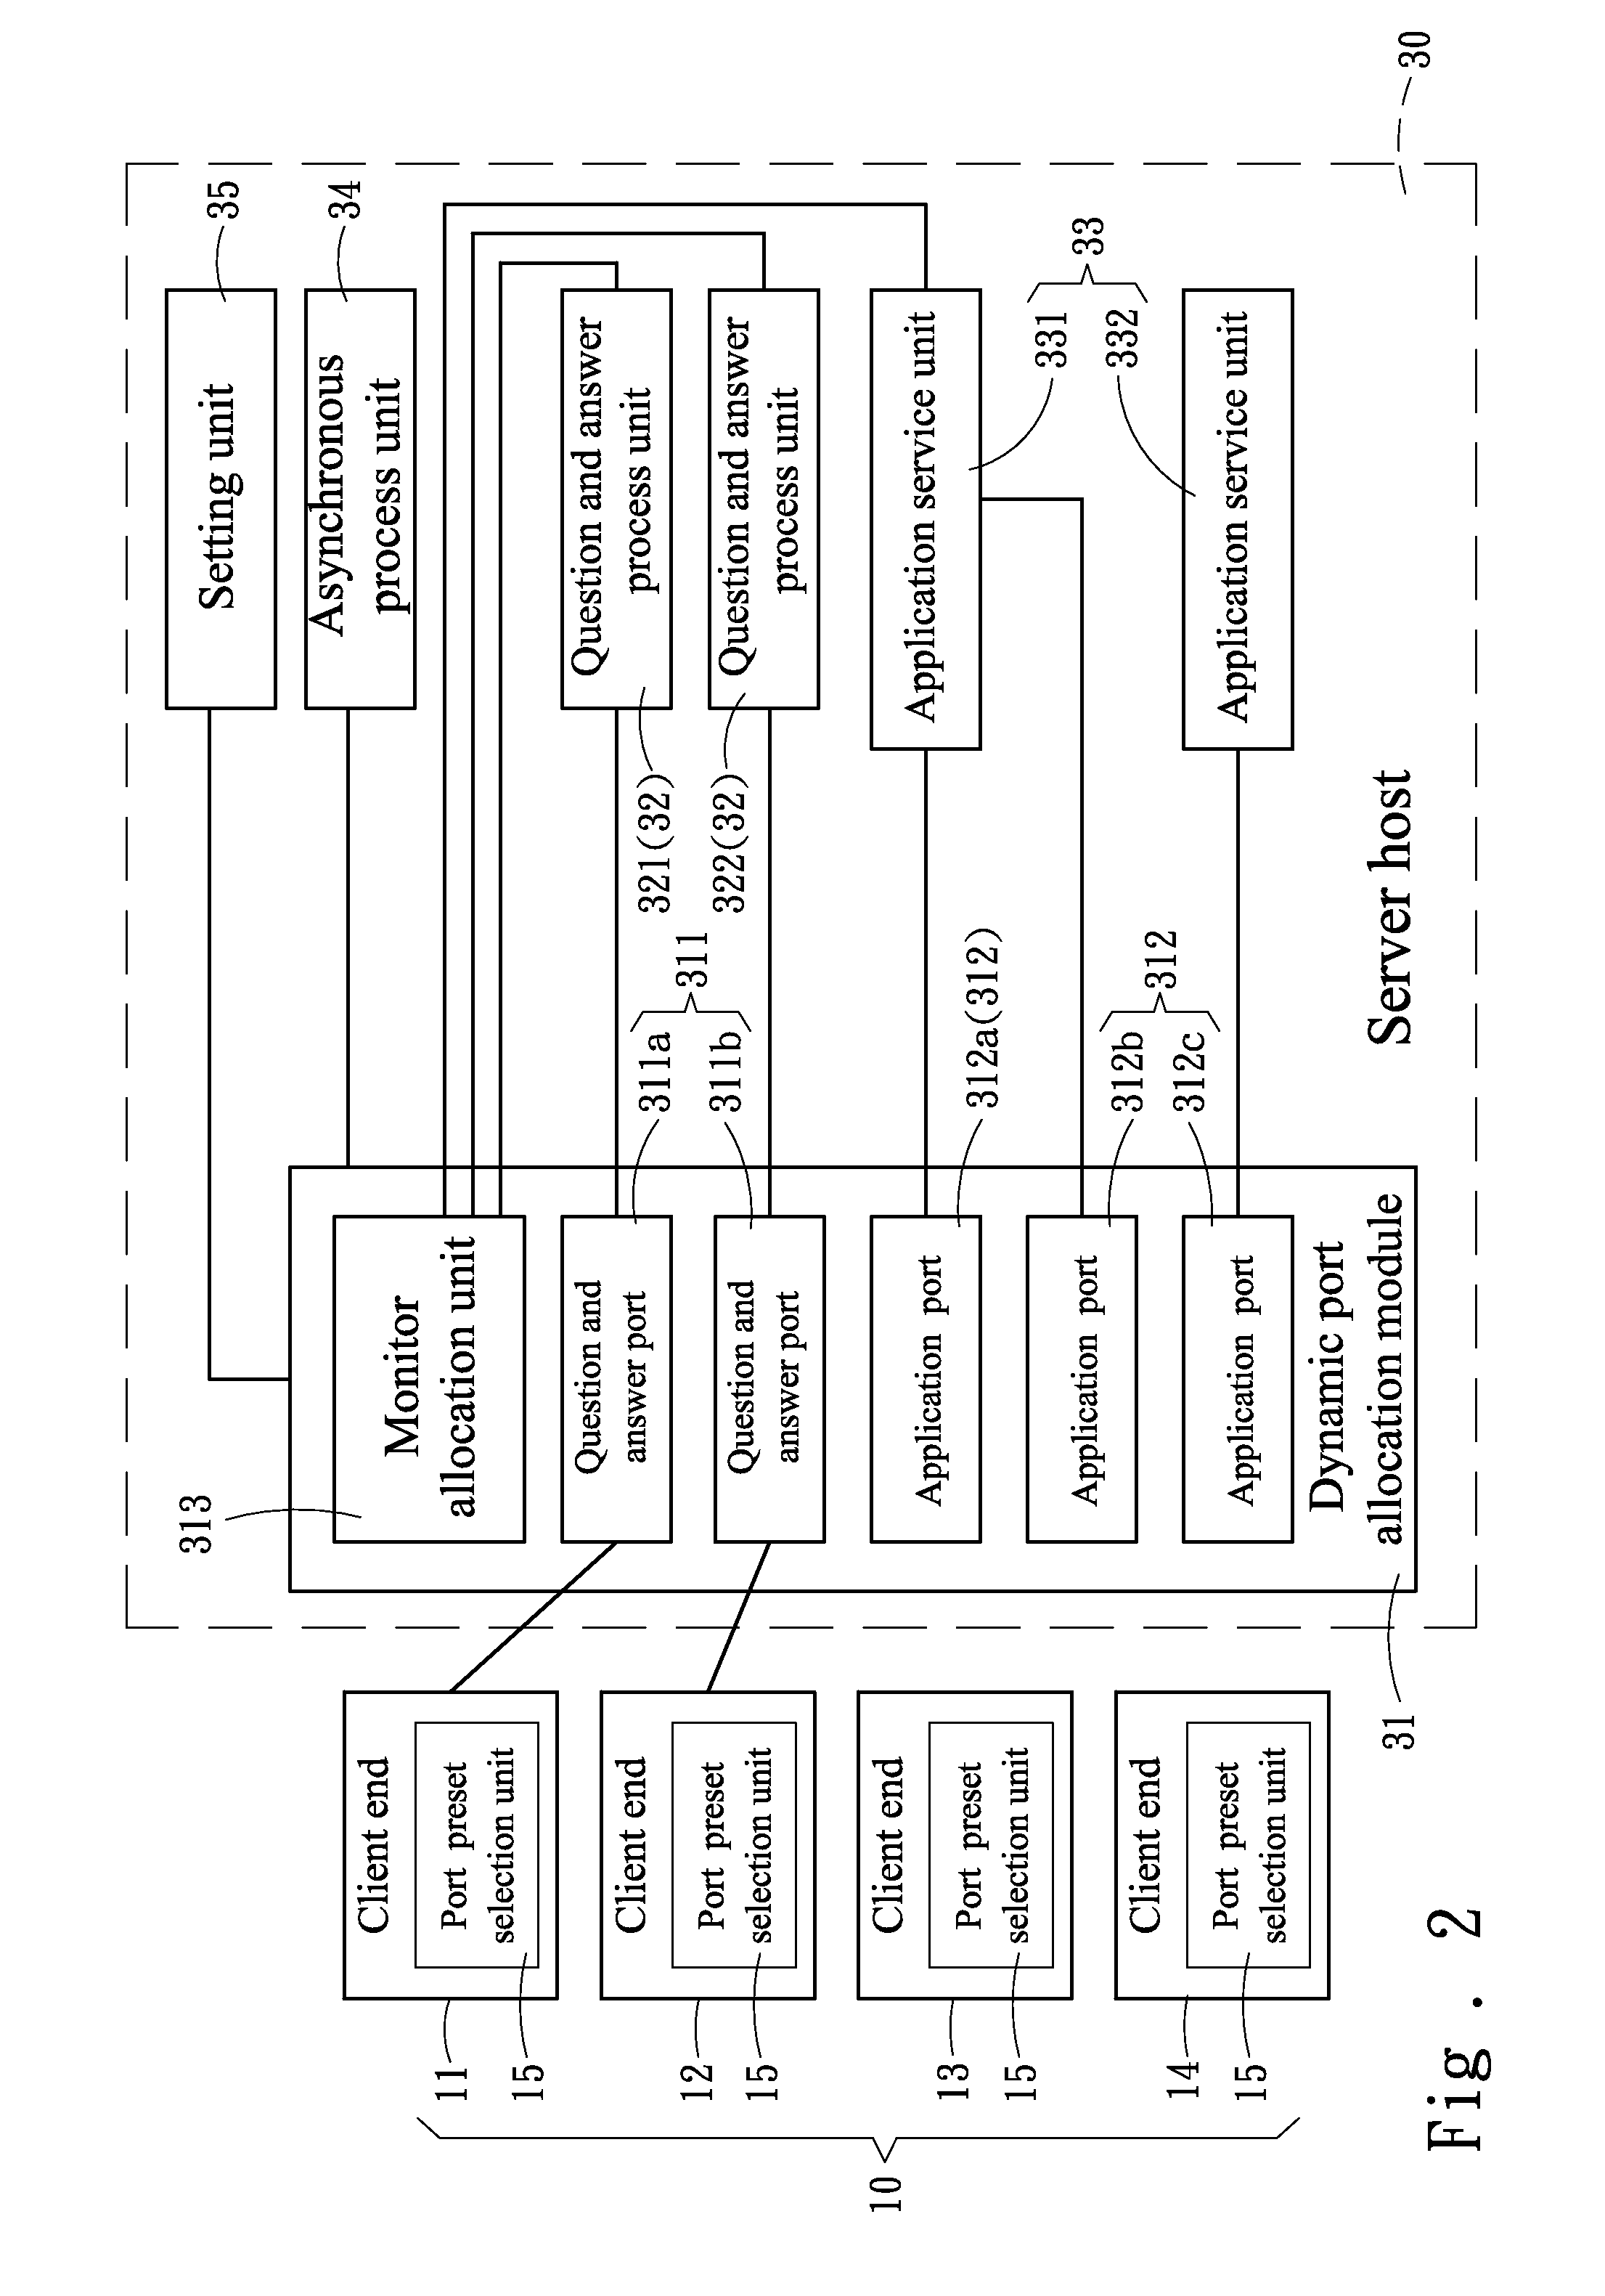 Server system connection process method preventing network congestion